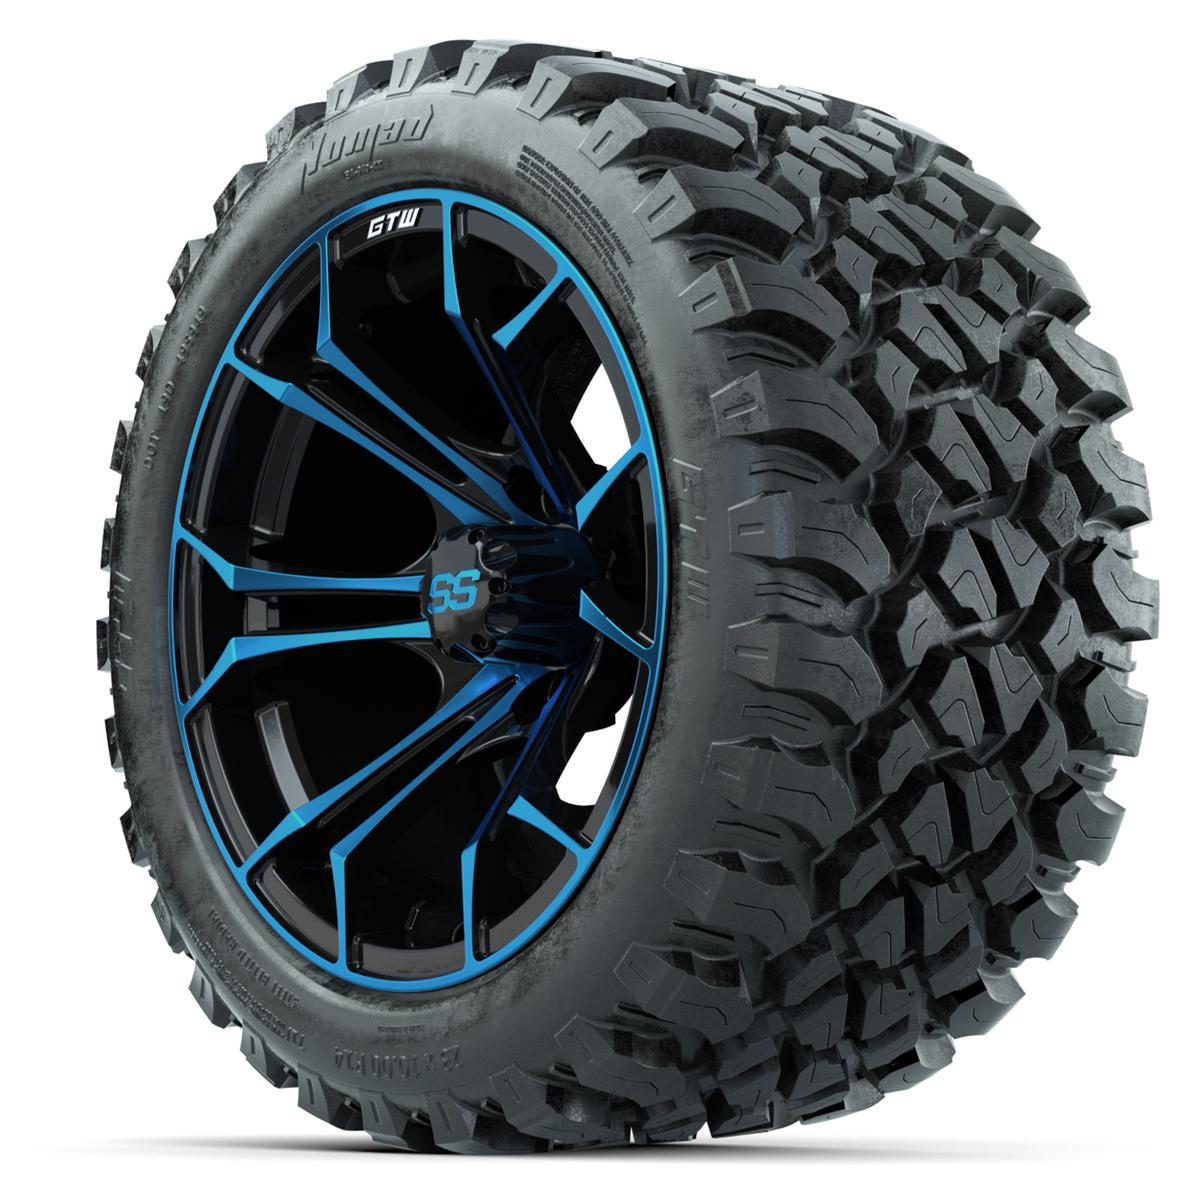 GTW Spyder Blue/Black 14 in Wheels with 23x10-14 GTW Nomad All-Terrain Tires – Full Set